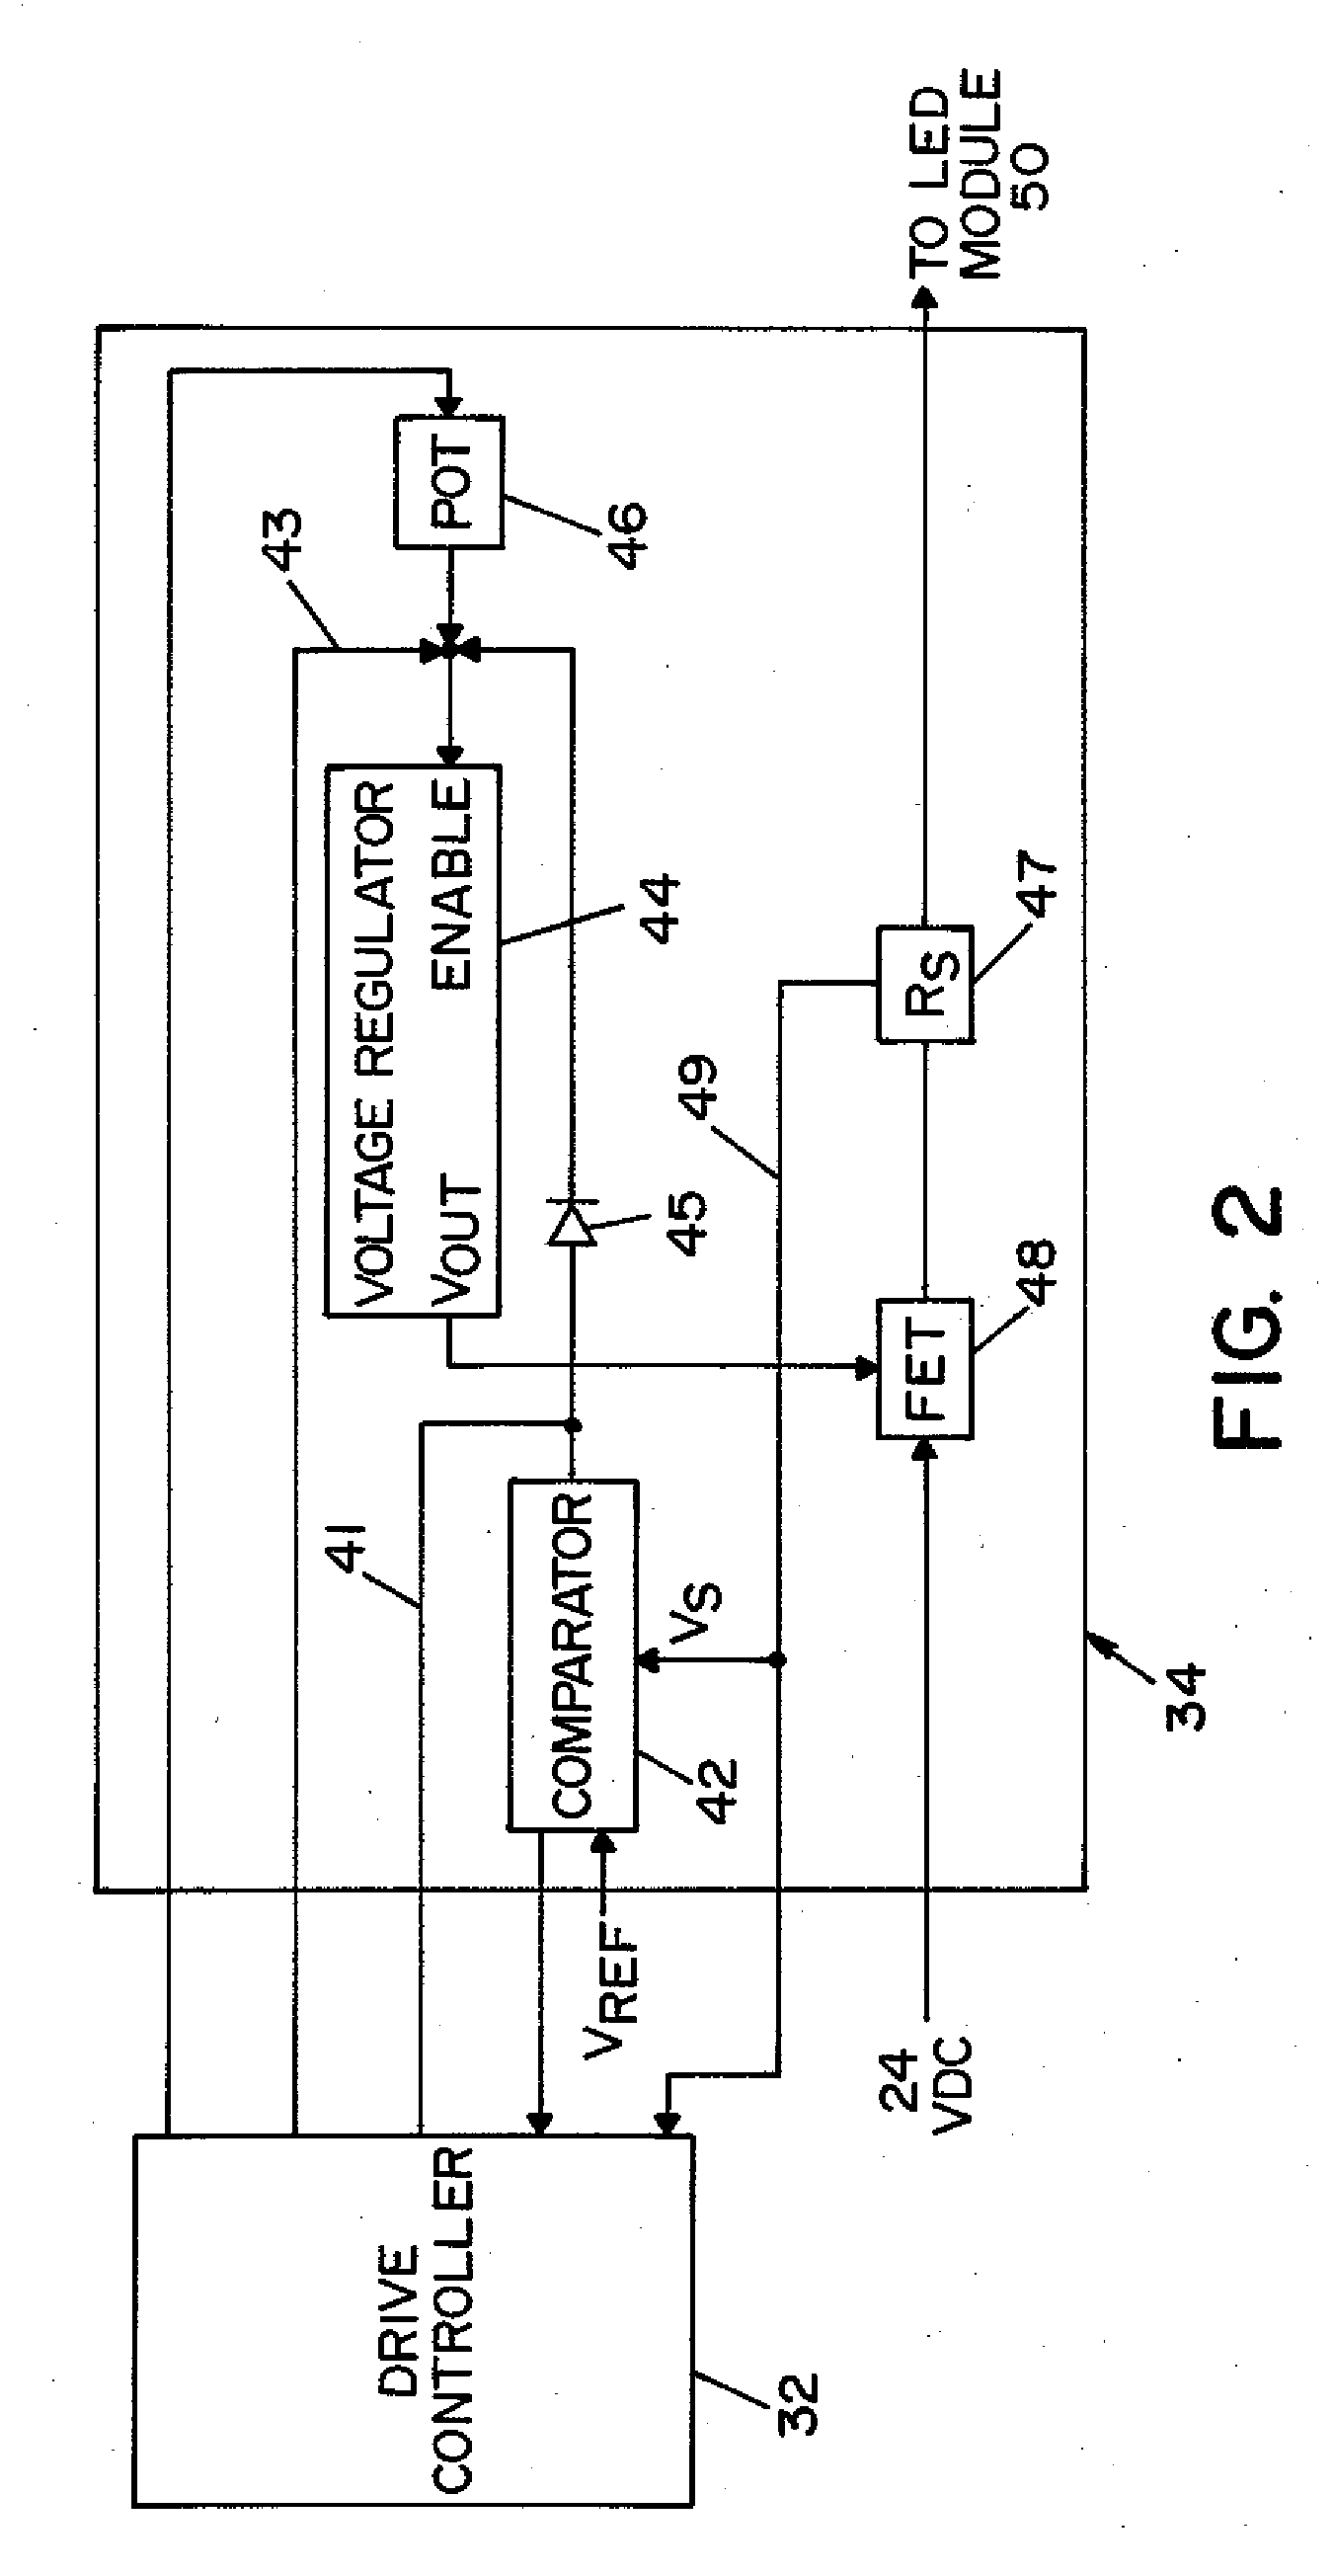 Lighting control system for a lighting device